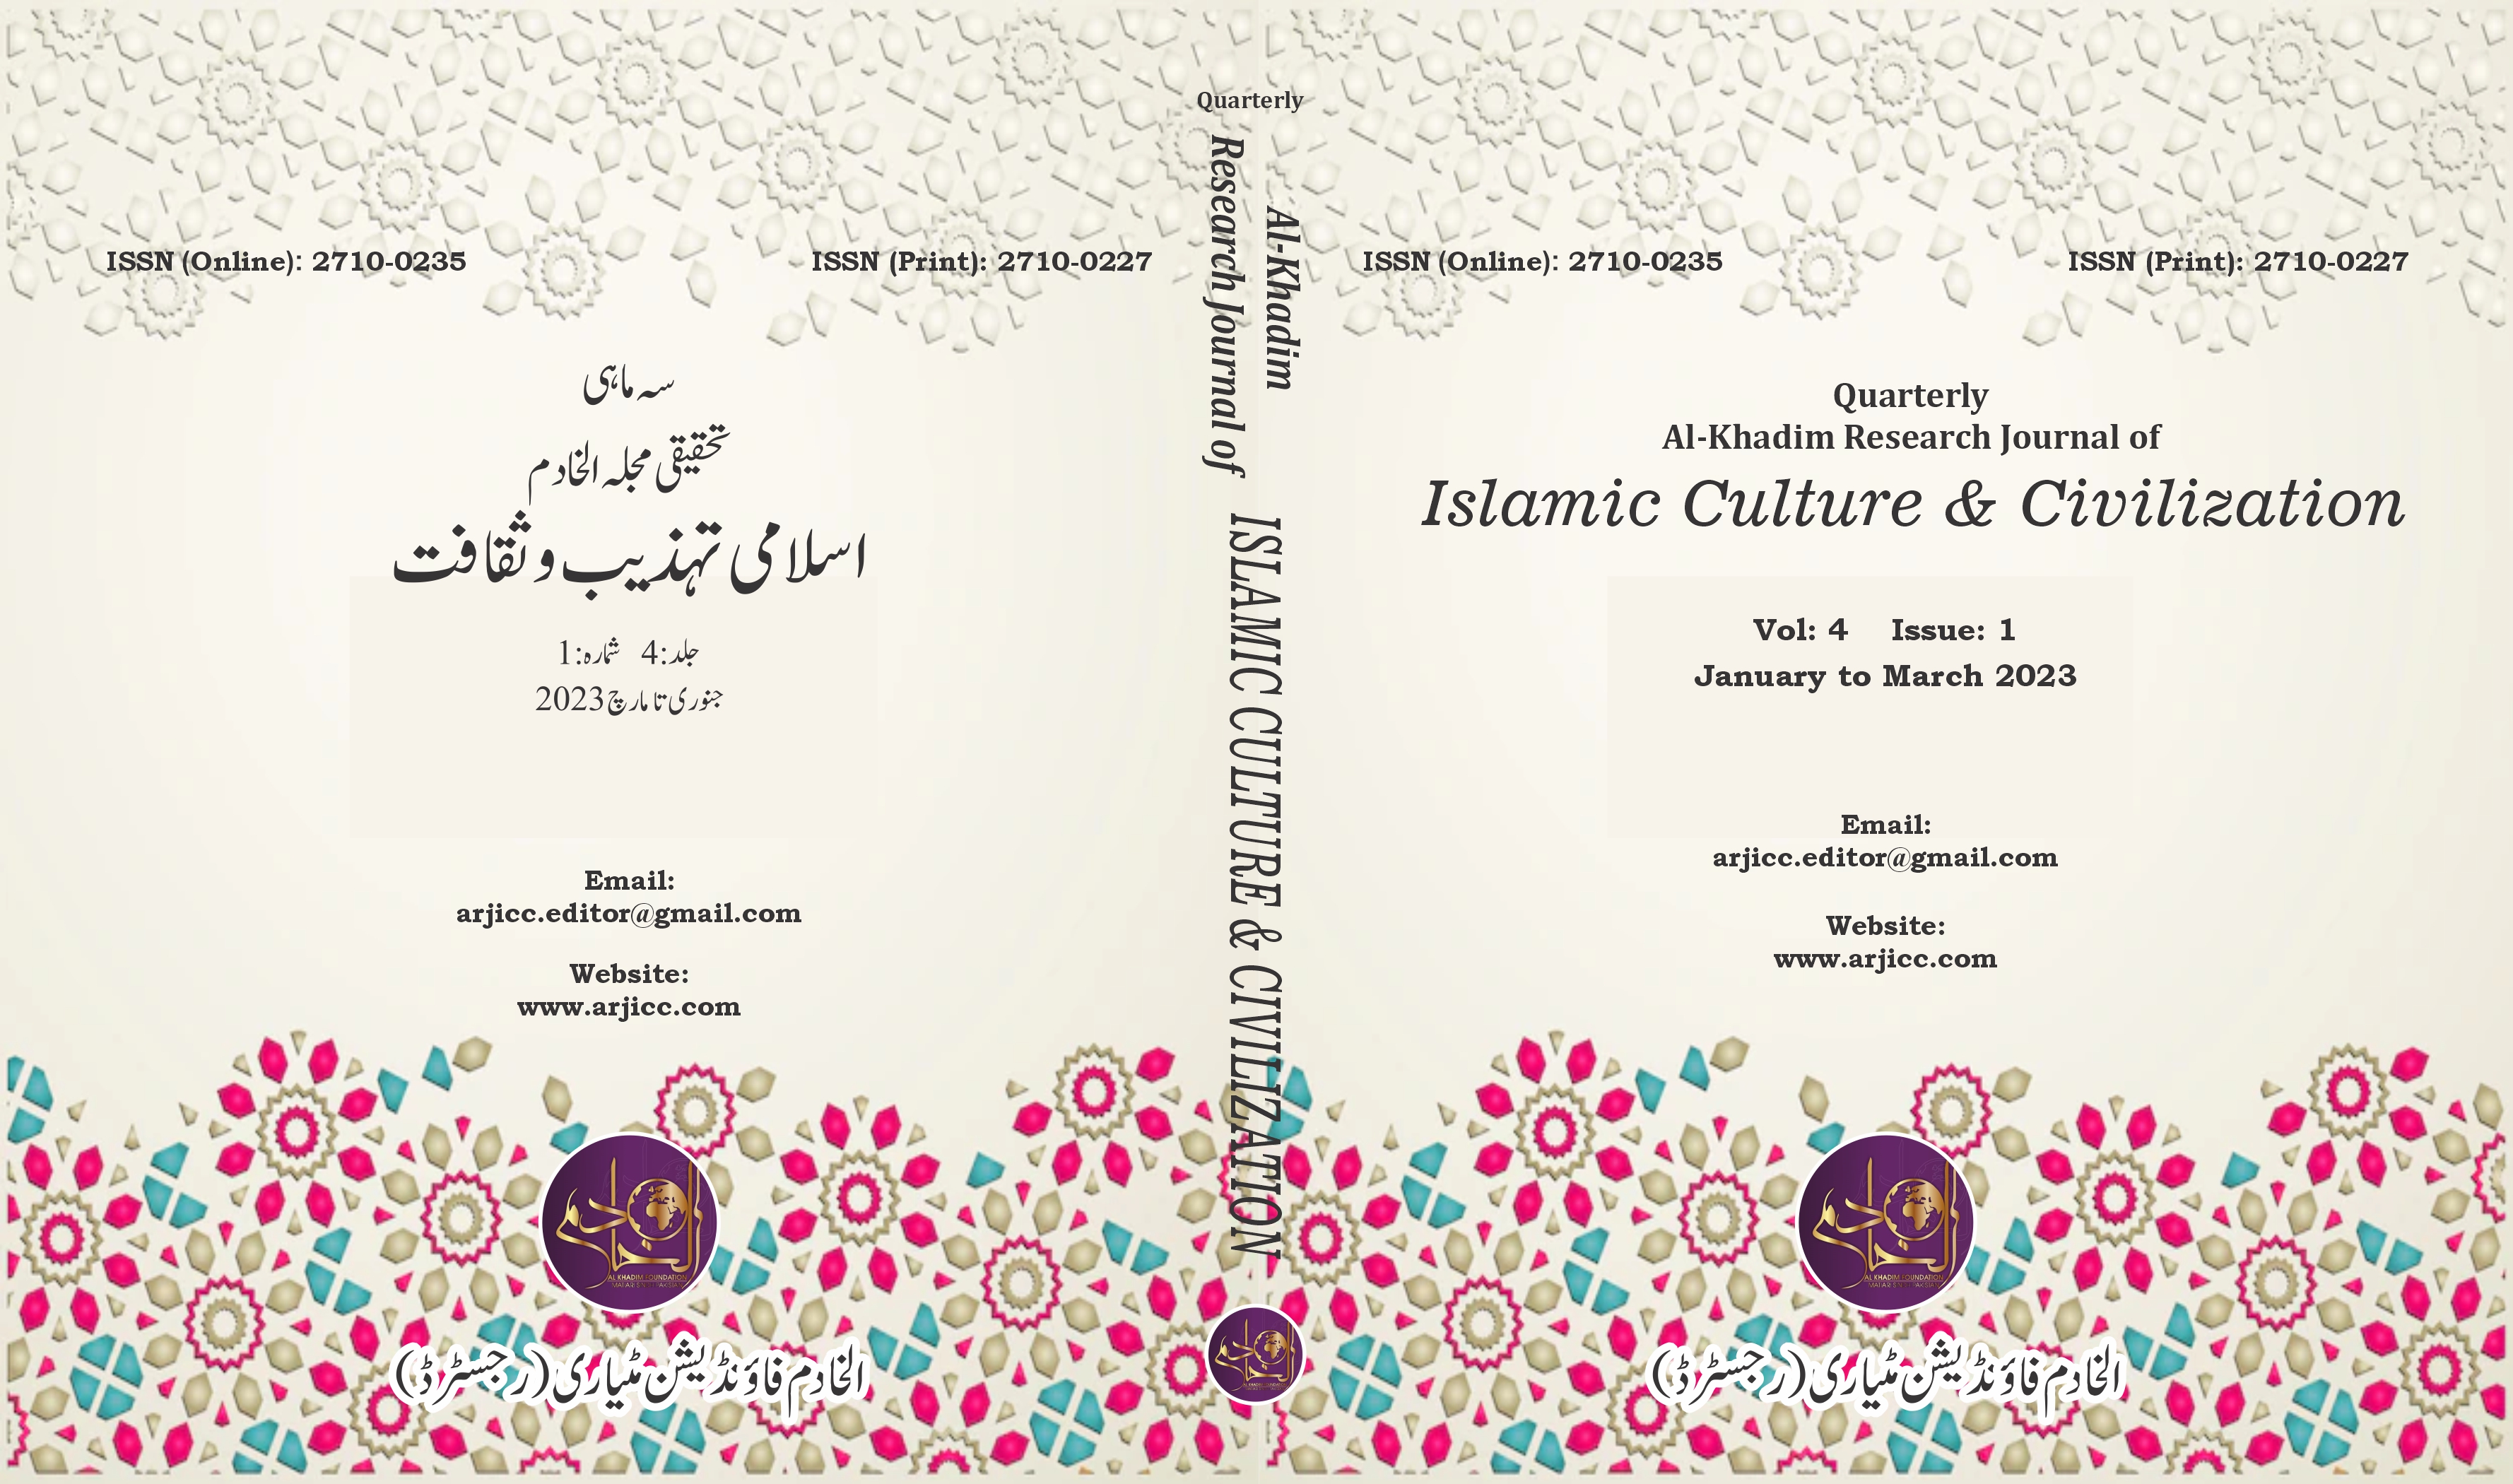 					View Vol. 4 No. 1 (2023): Al Khadim Research Journal of Islamic Culture and Civilization (January to March 2023)
				